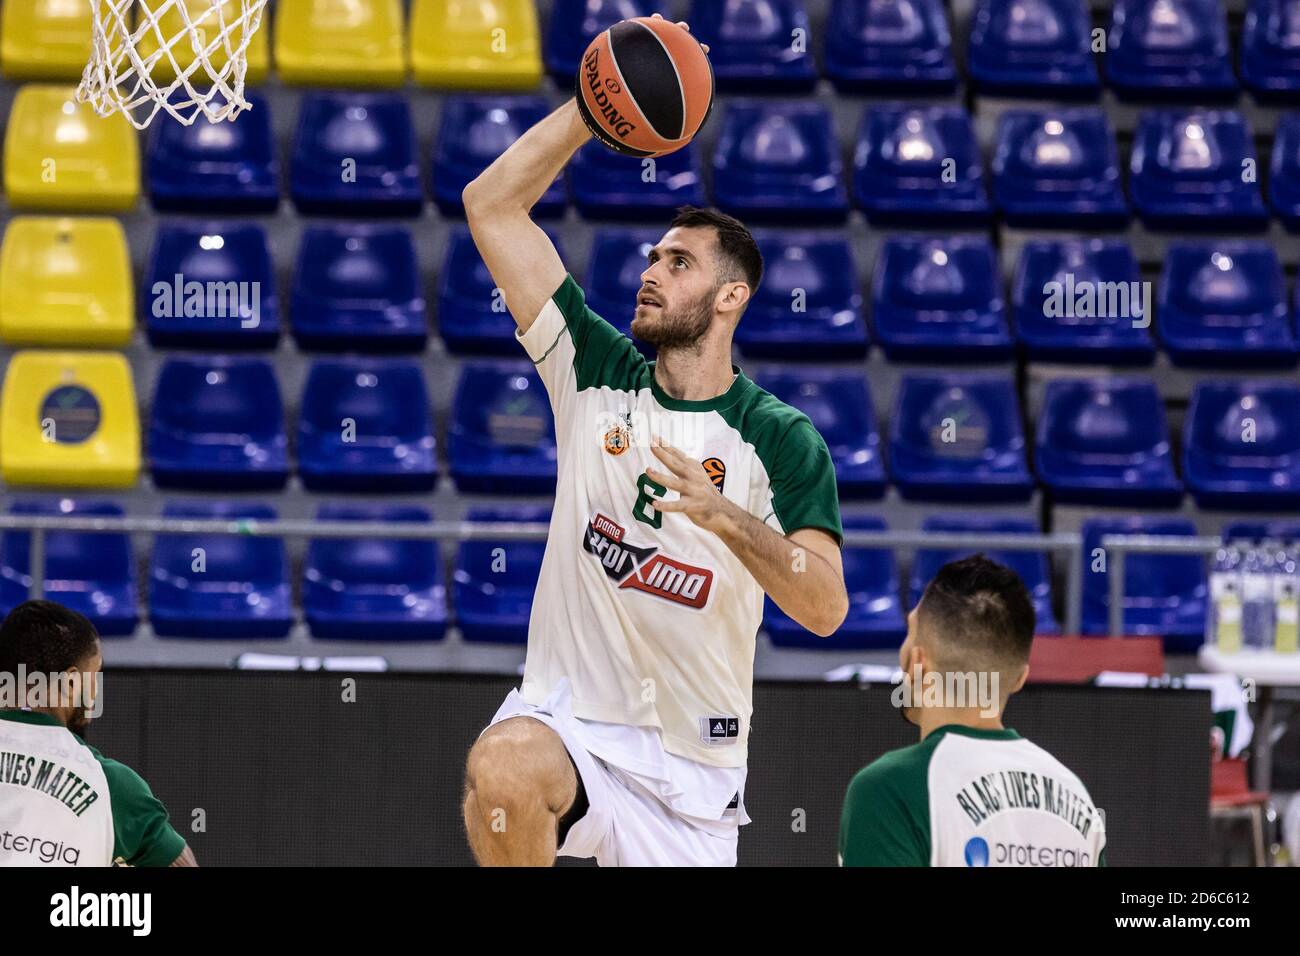 eorgios Papagiannis of Panathinaikos OPAP warming up before the Turkish Airlines EuroLeague basketball match between Fc Barcelona and Panathinaikos O Stock Photo